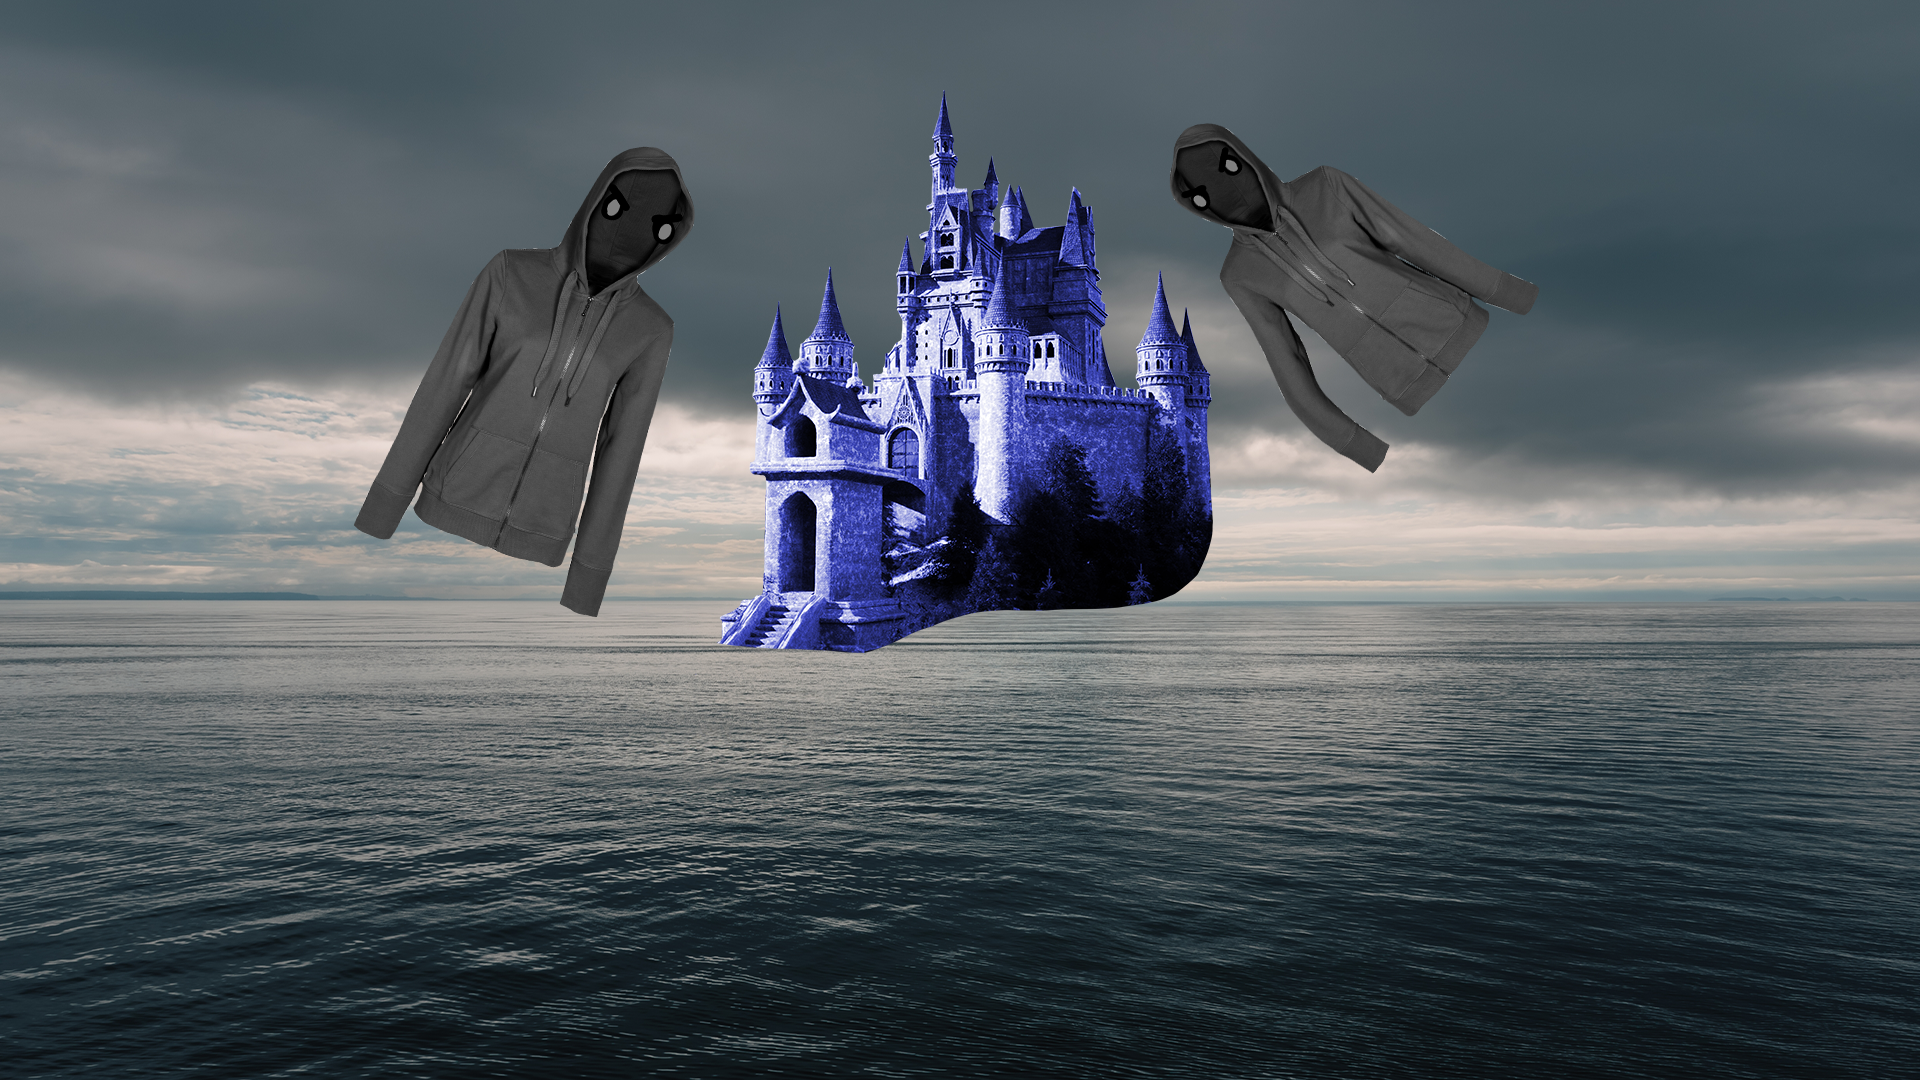 Dementors hovering around a castle in the sea